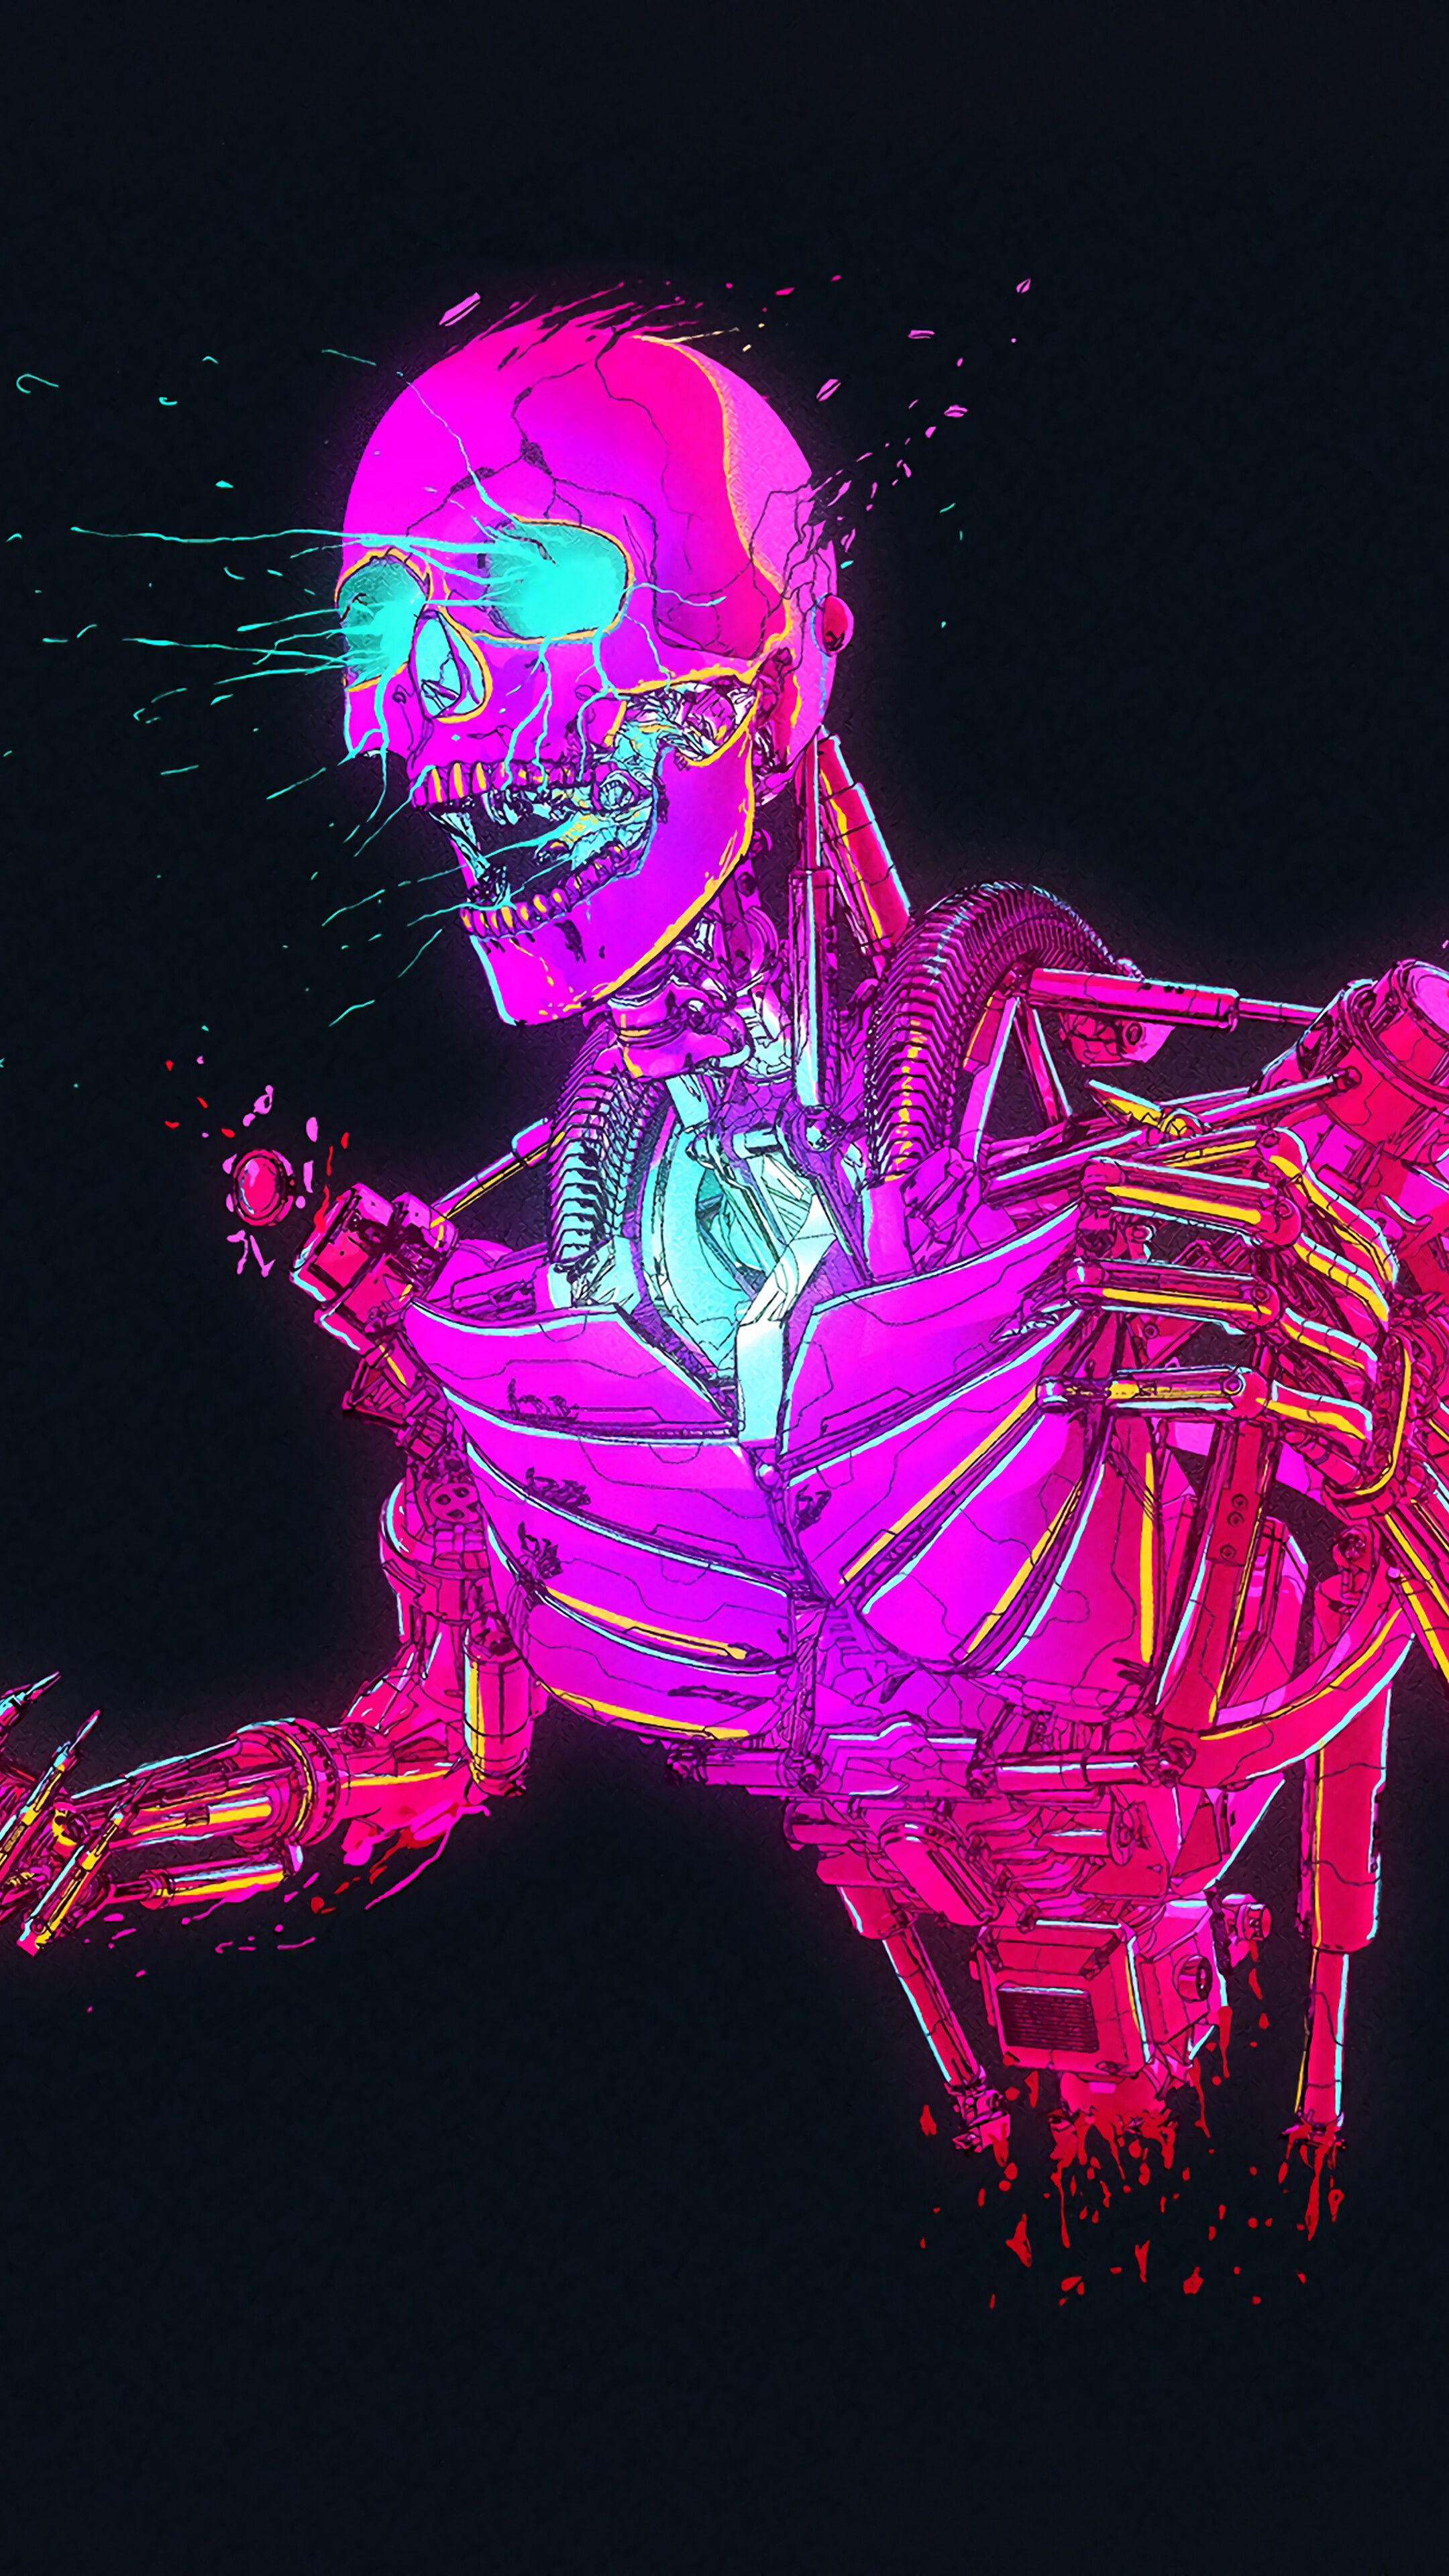 Robot, Skeleton, Sci Fi, Digital Art, 4K Phone HD Wallpaper, Image, Background, Photo And Picture Gallery HD Wallpaper